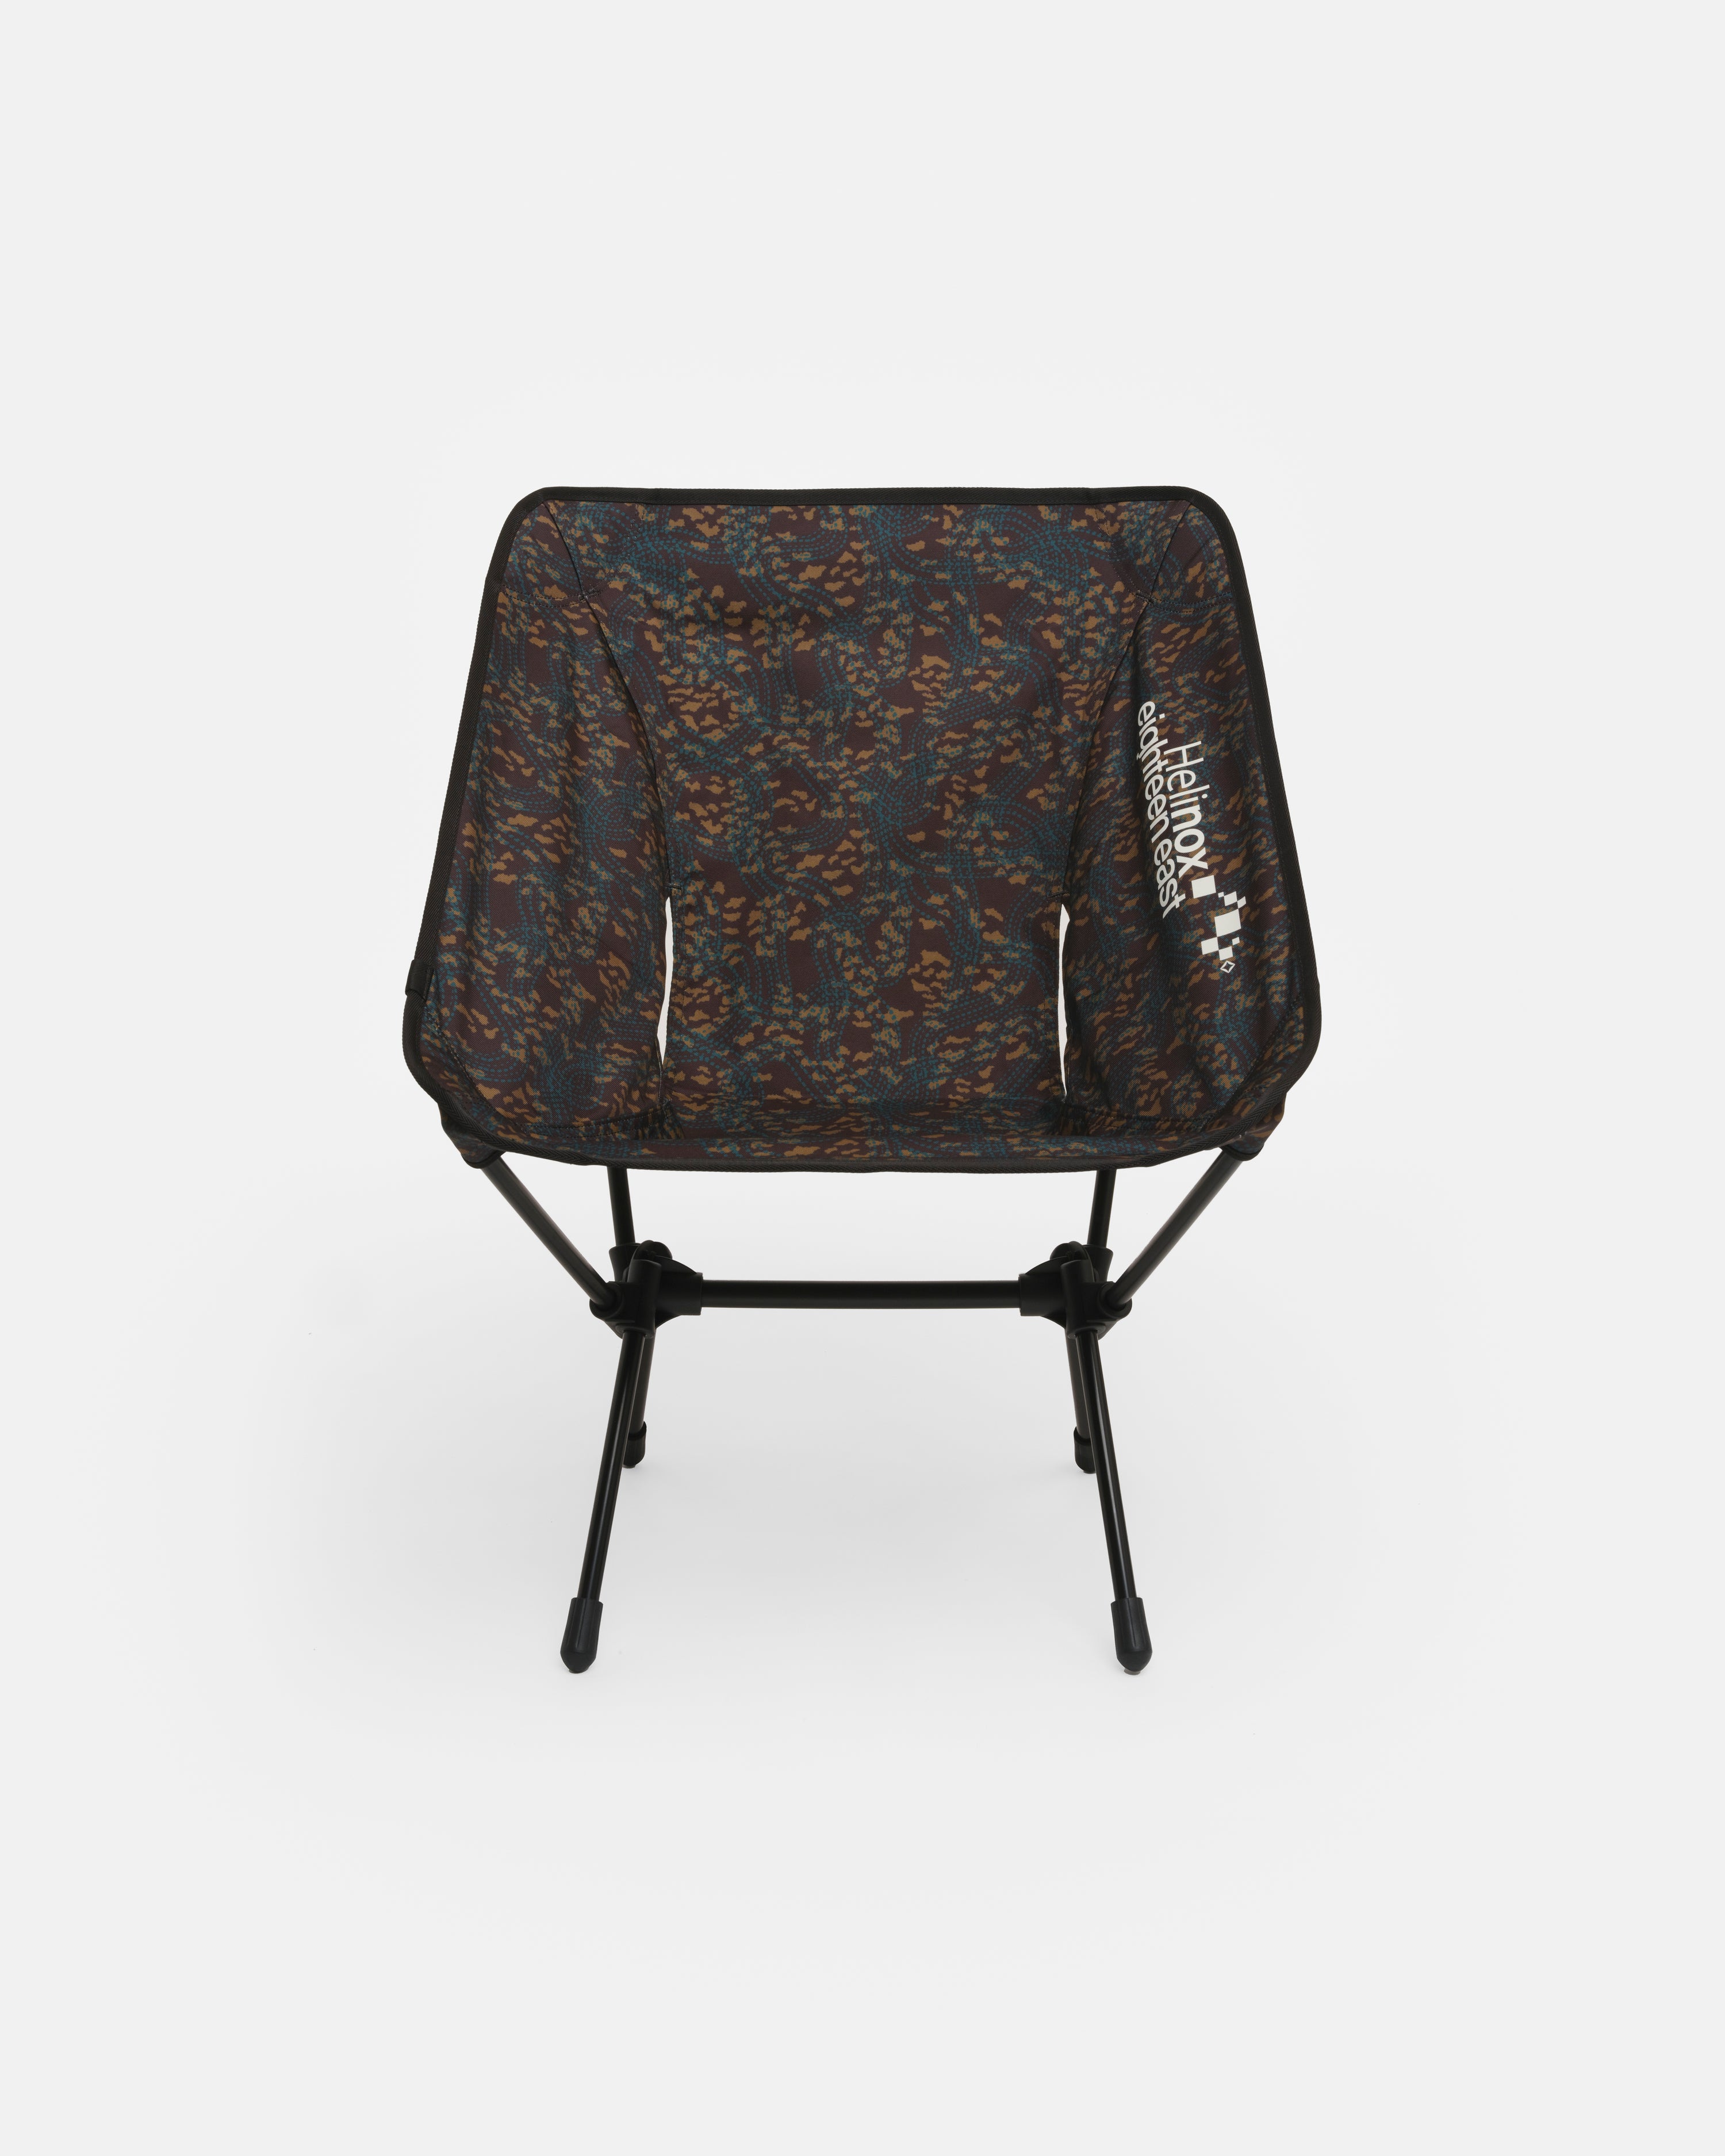 HELINOX TACTICAL CHAIR ONE - OBSIDIAN "TRACKS" PRINTED 600D RECYCLED POLYESTER CANVAS